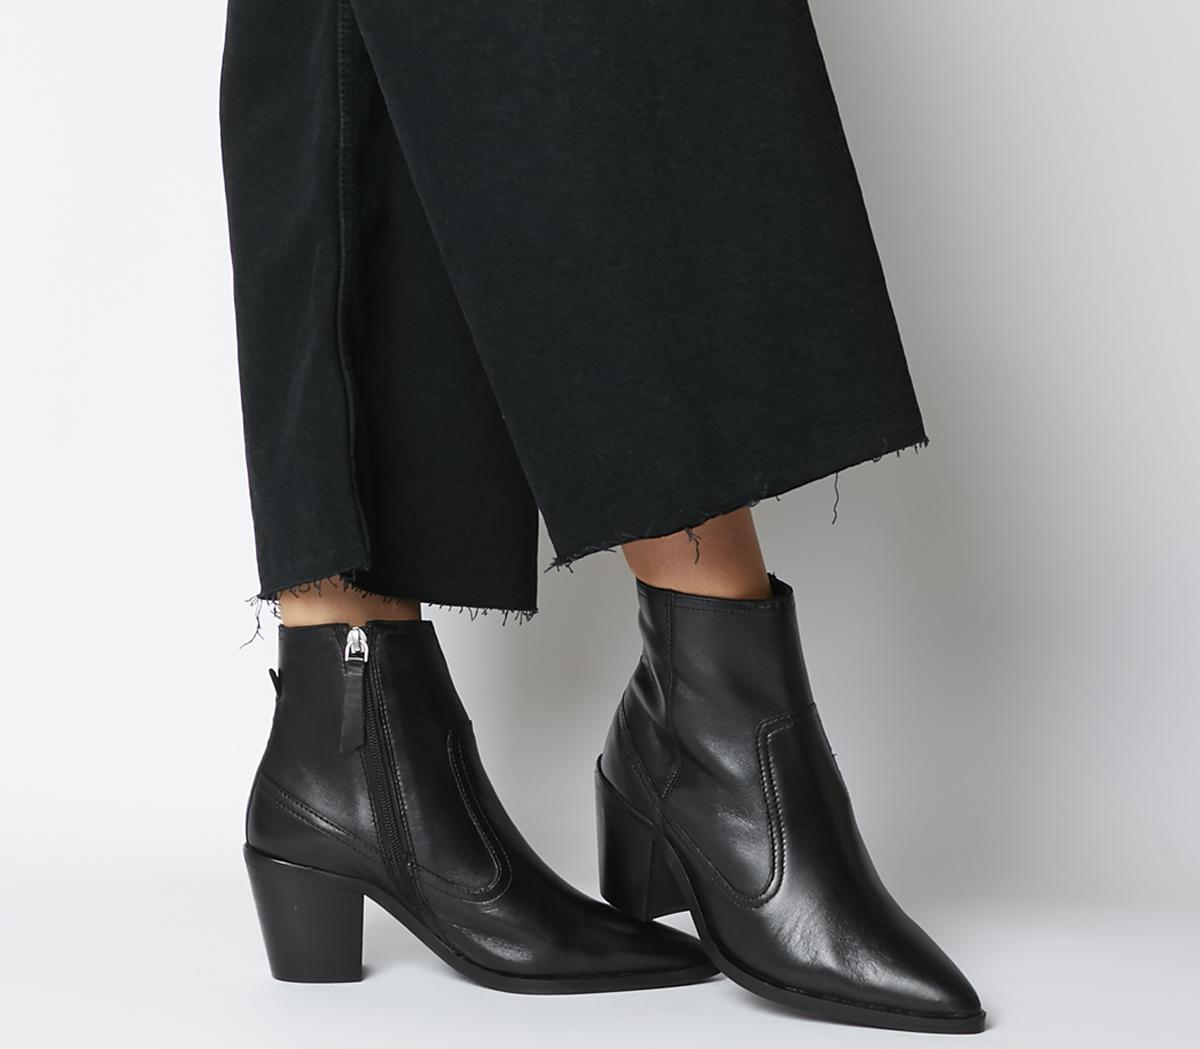 OFFICEAnais Pointed Western BootsBlack Leather